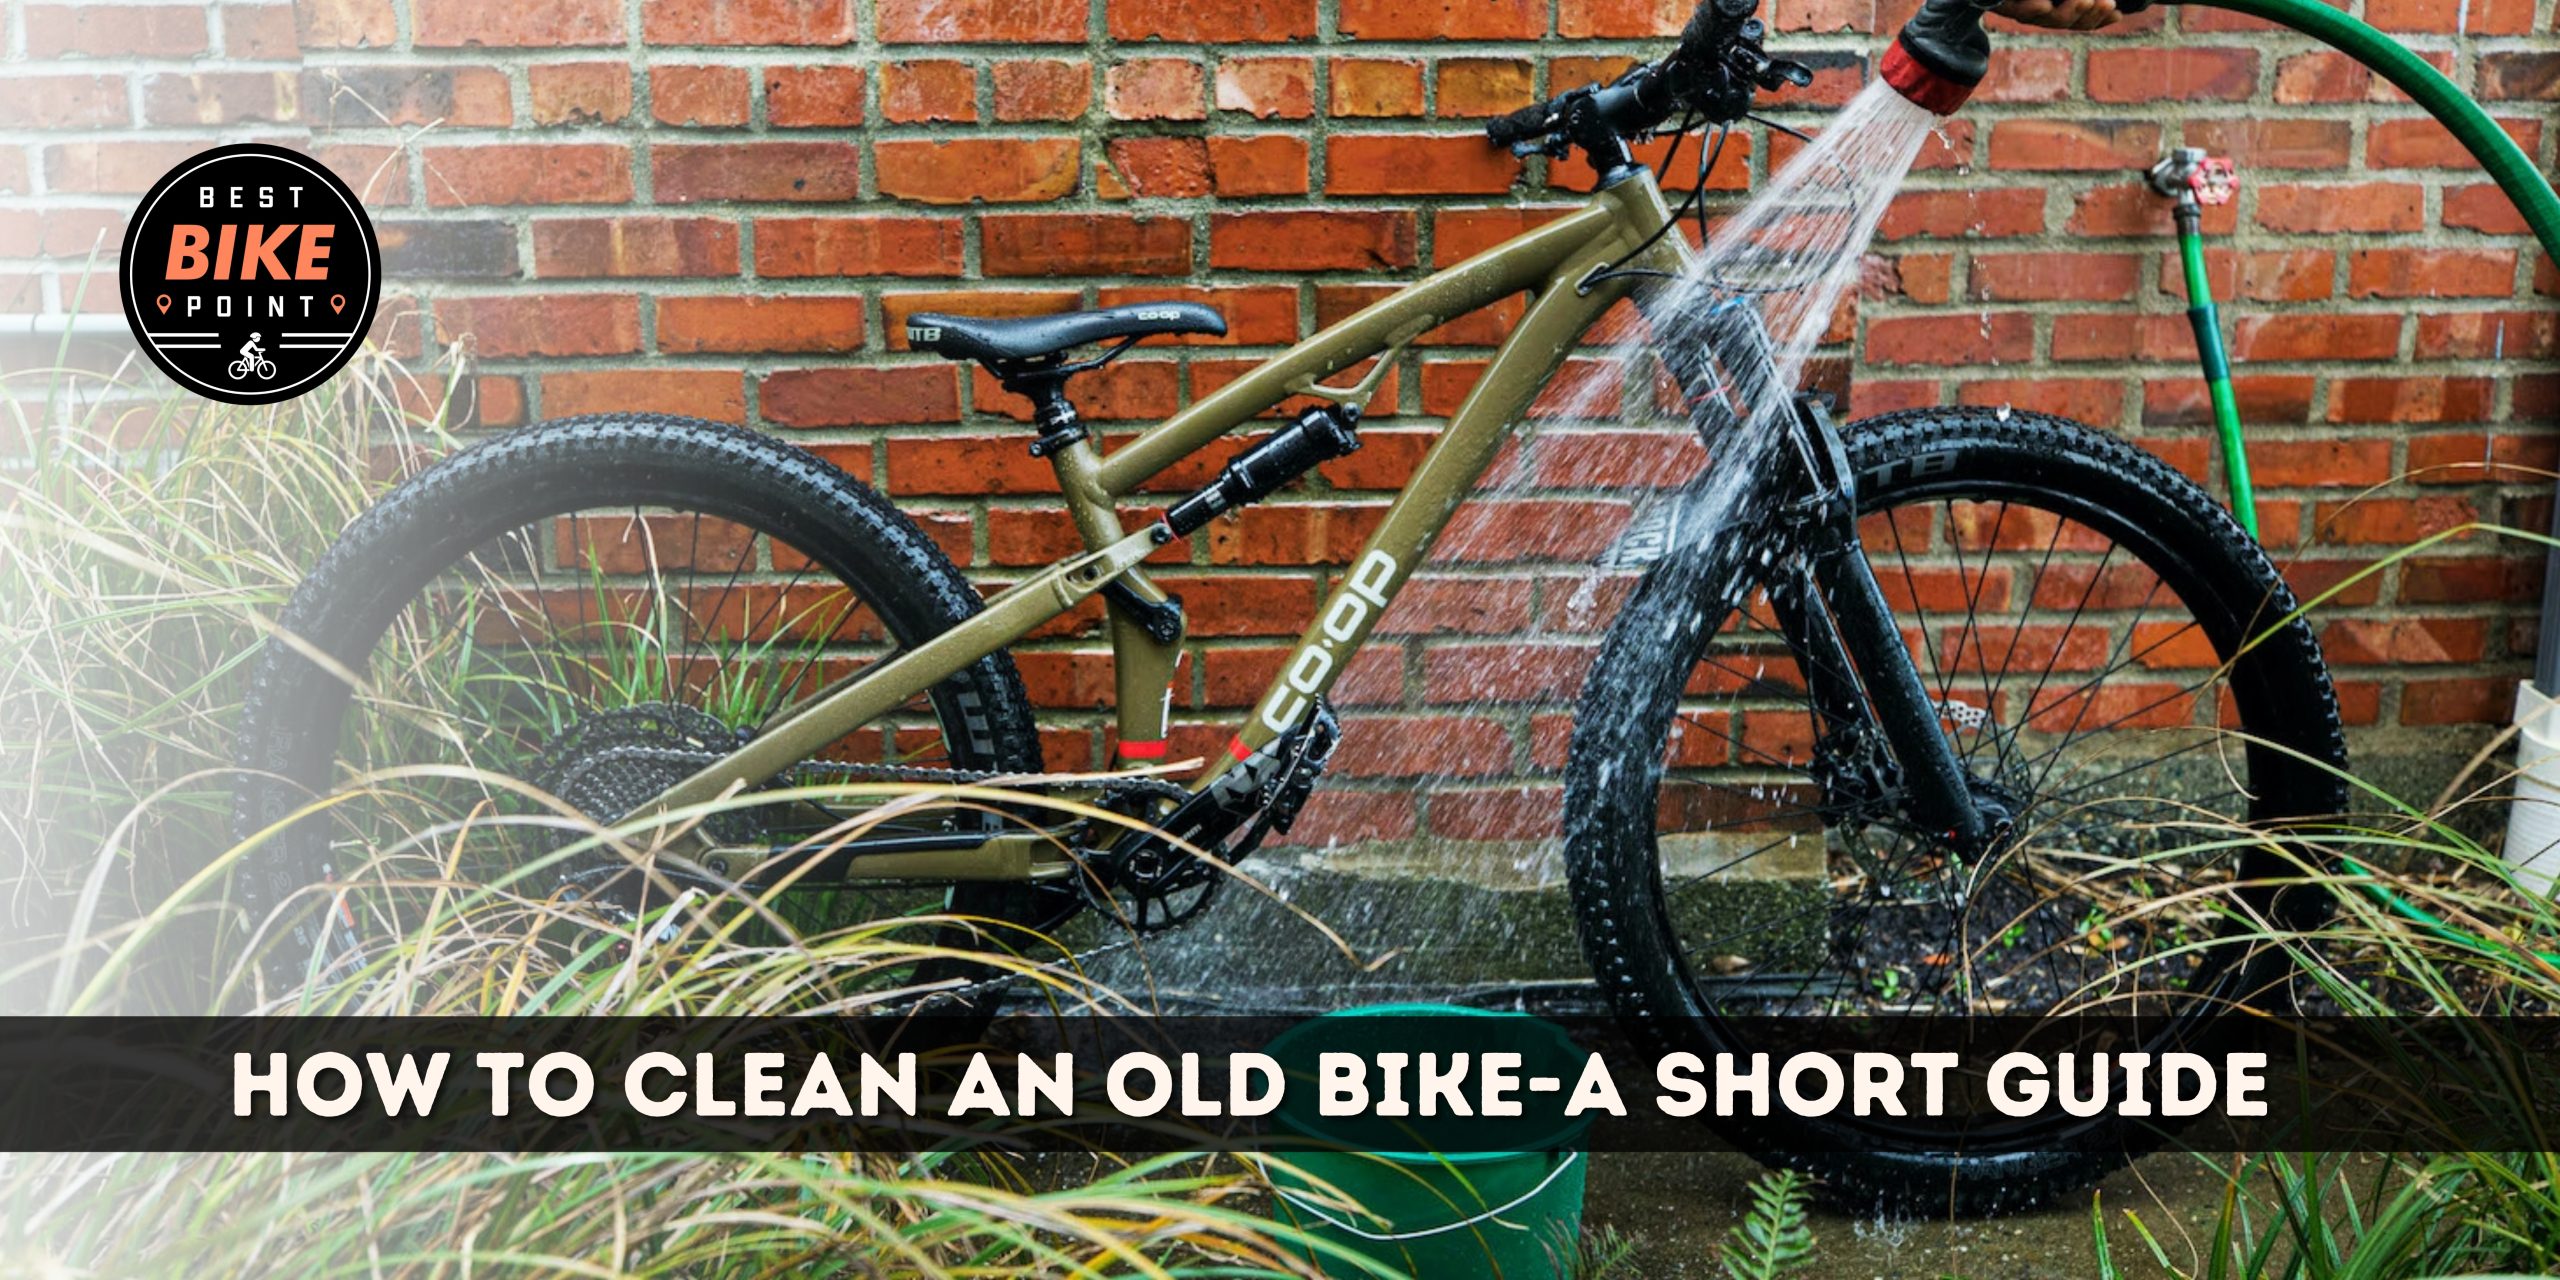 Cleaning an Old Bike